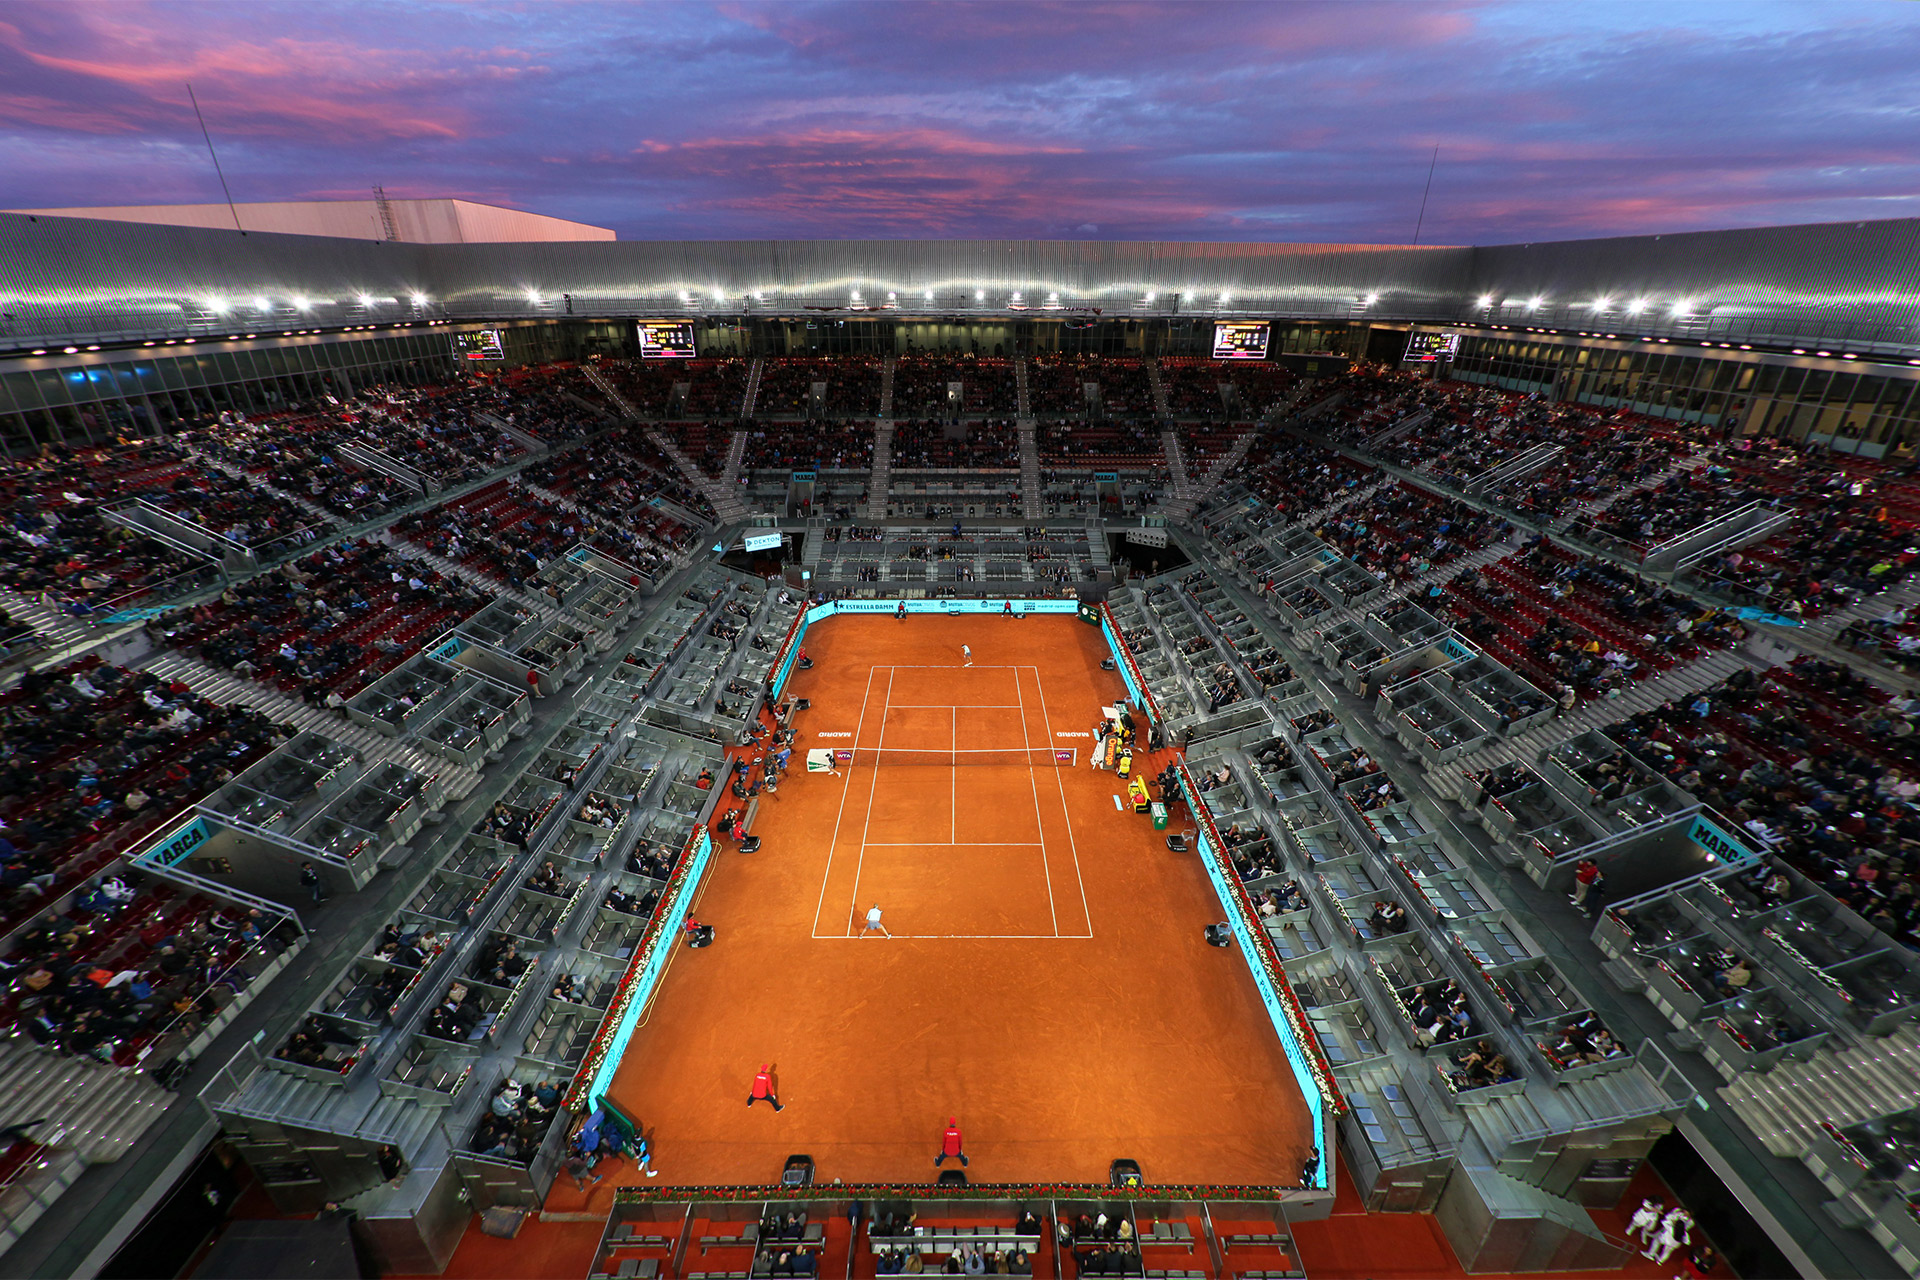 Openbank, new official sponsor of the Mutua Madrid Open